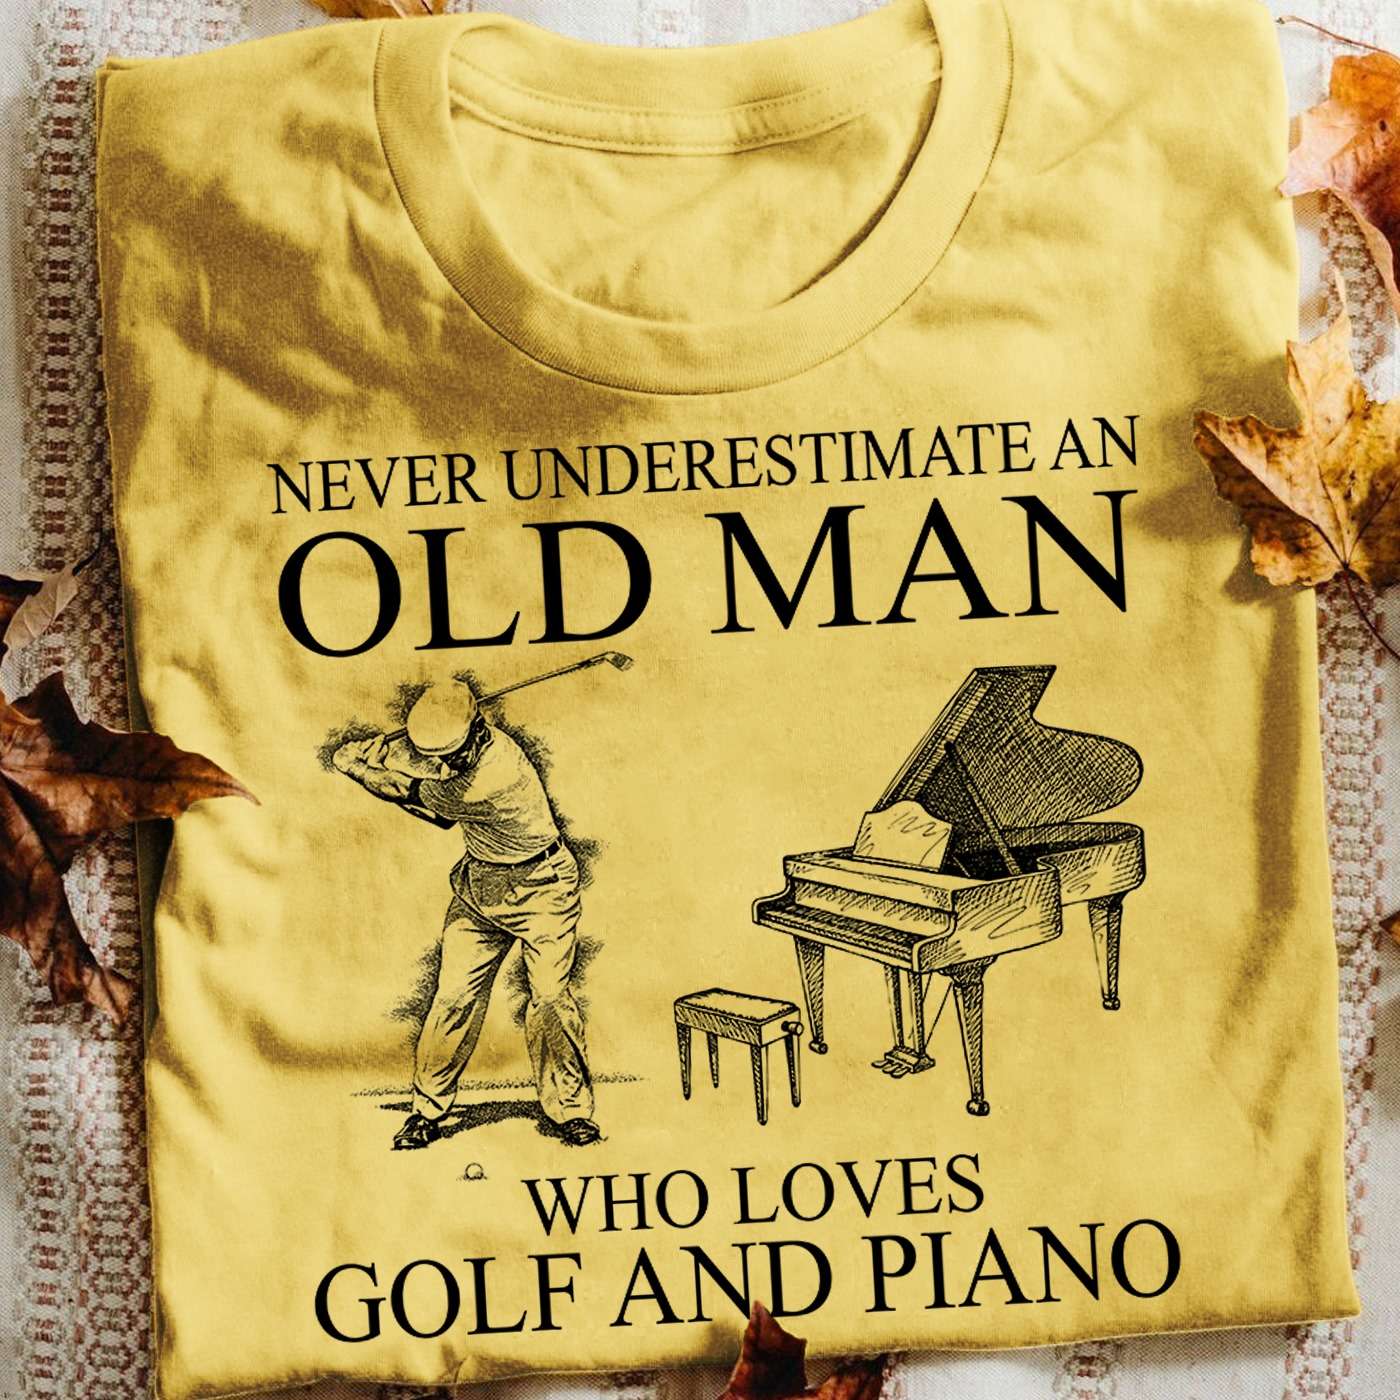 Never underestimate an old man who loves golf and piano - Old man golfer